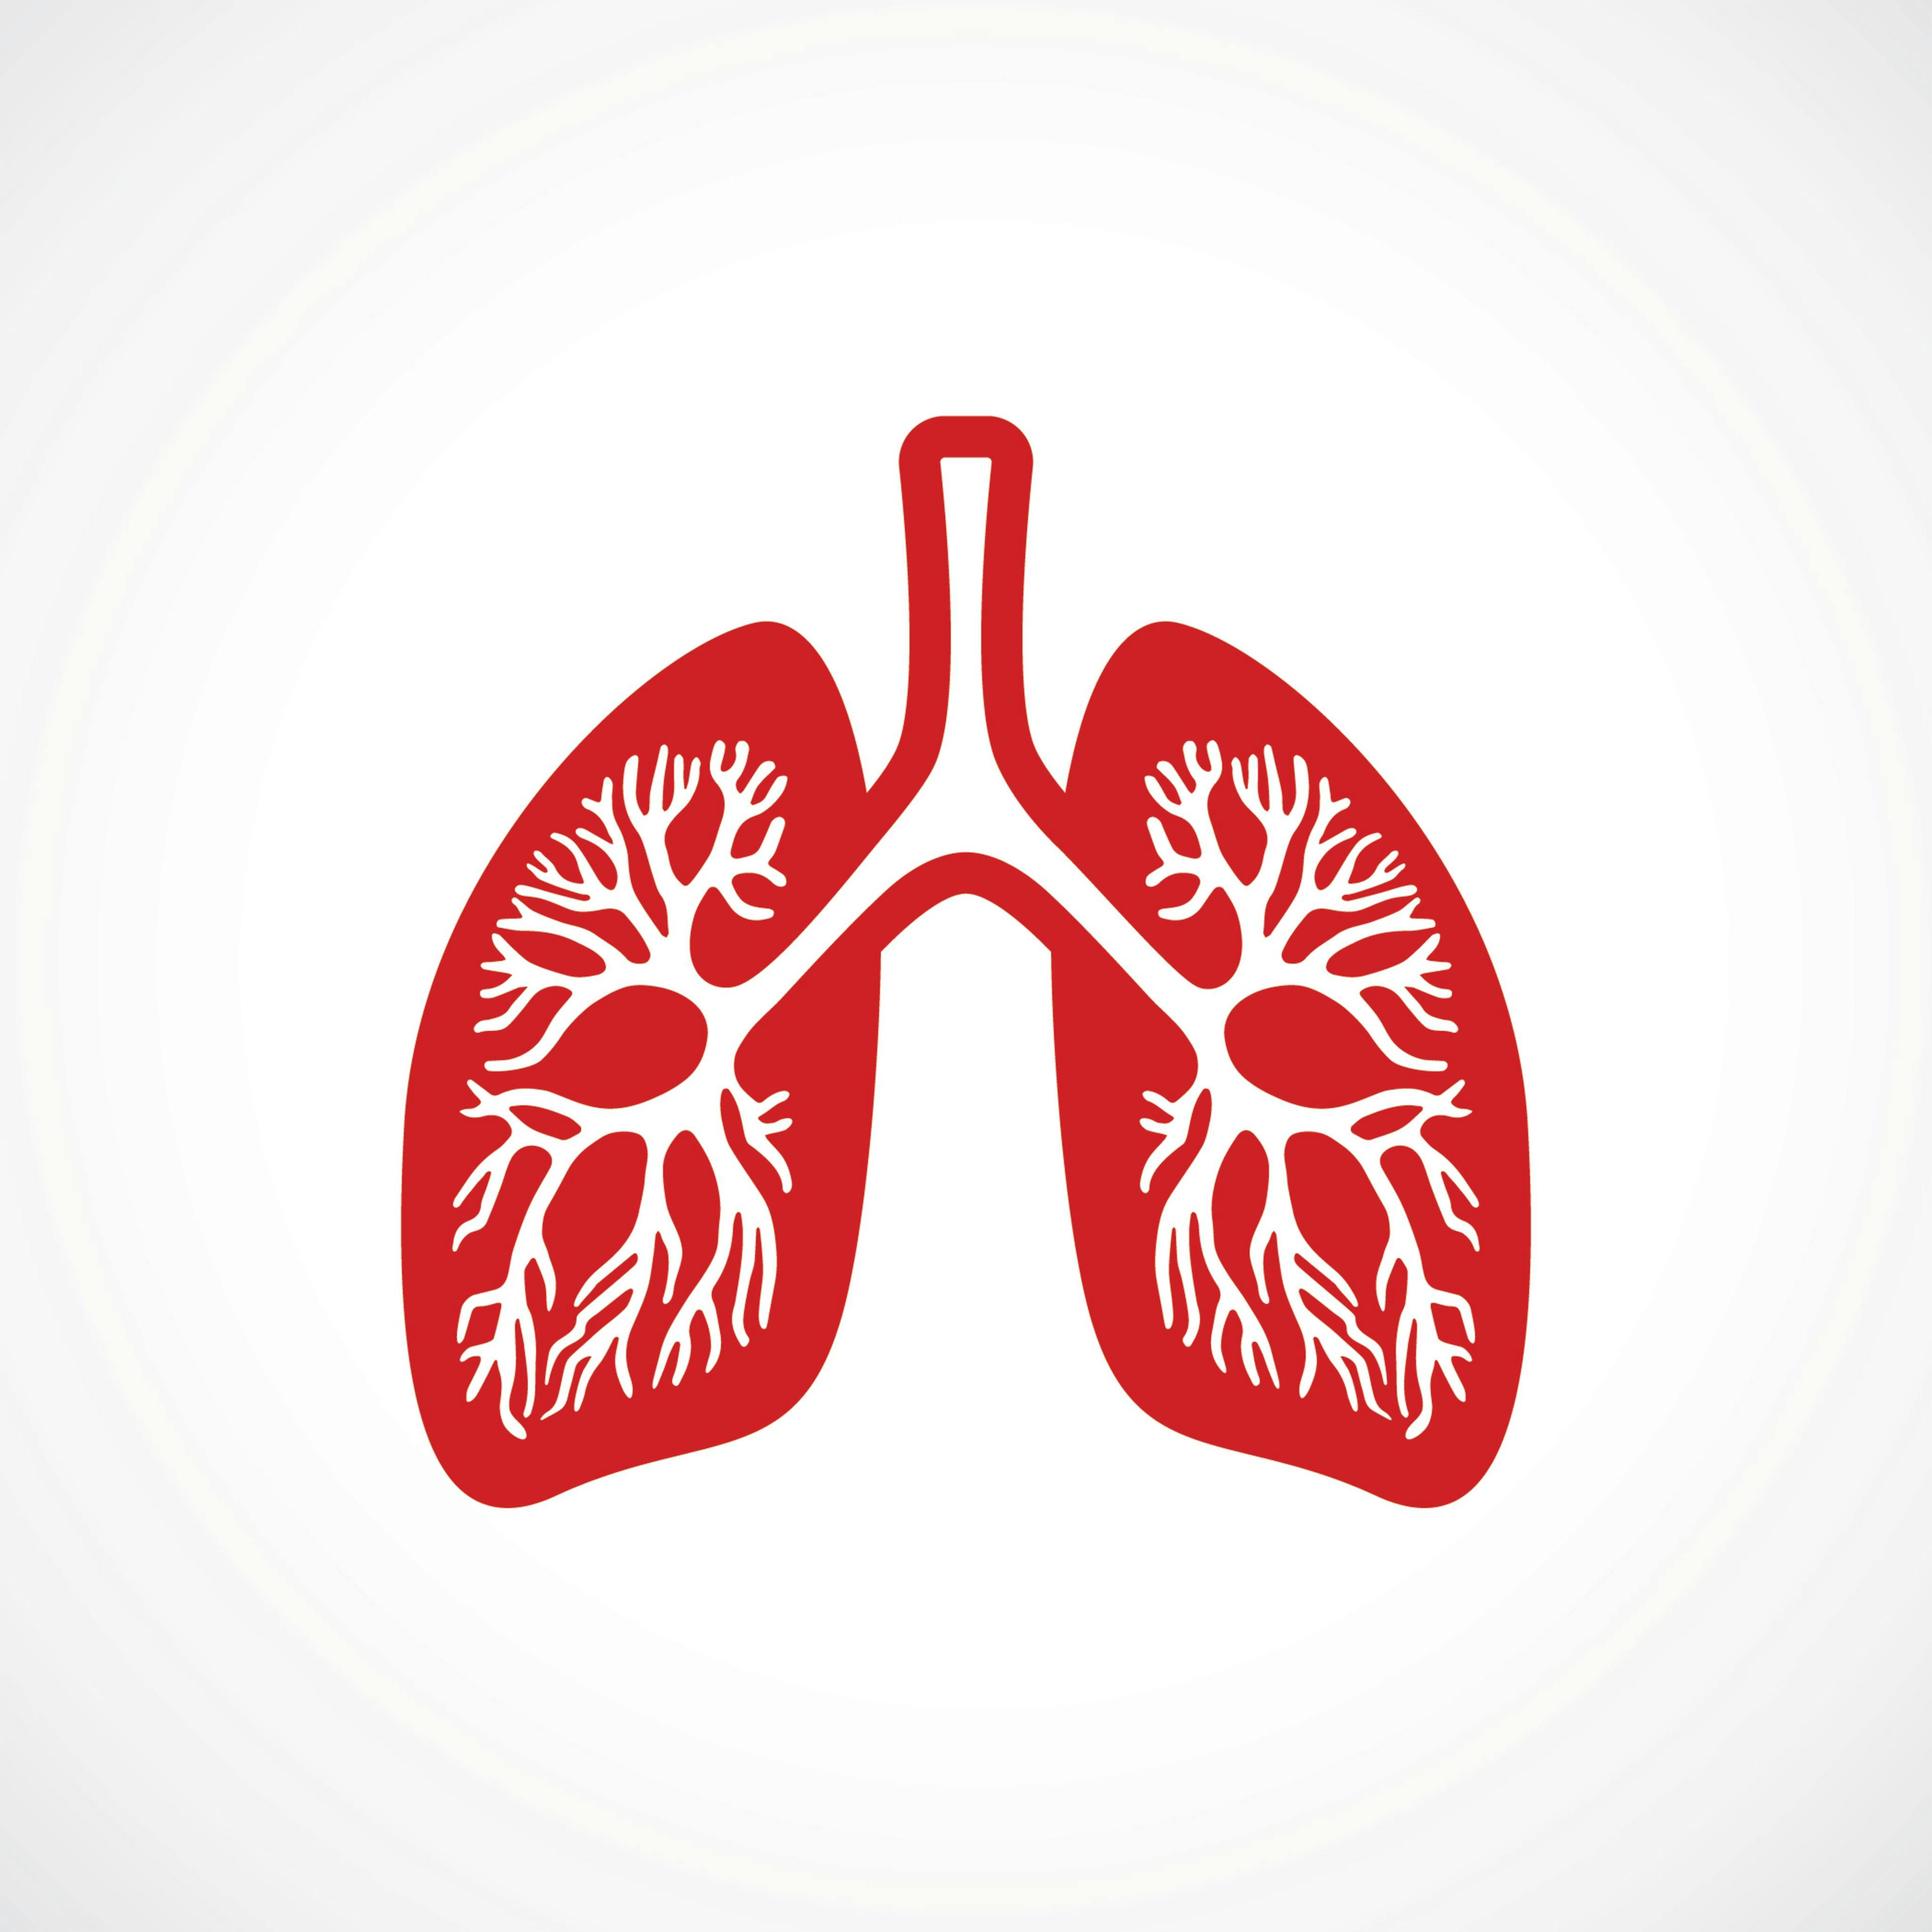 Sotorasib Shows Benefit for Patients With Certain Type of NSCLC